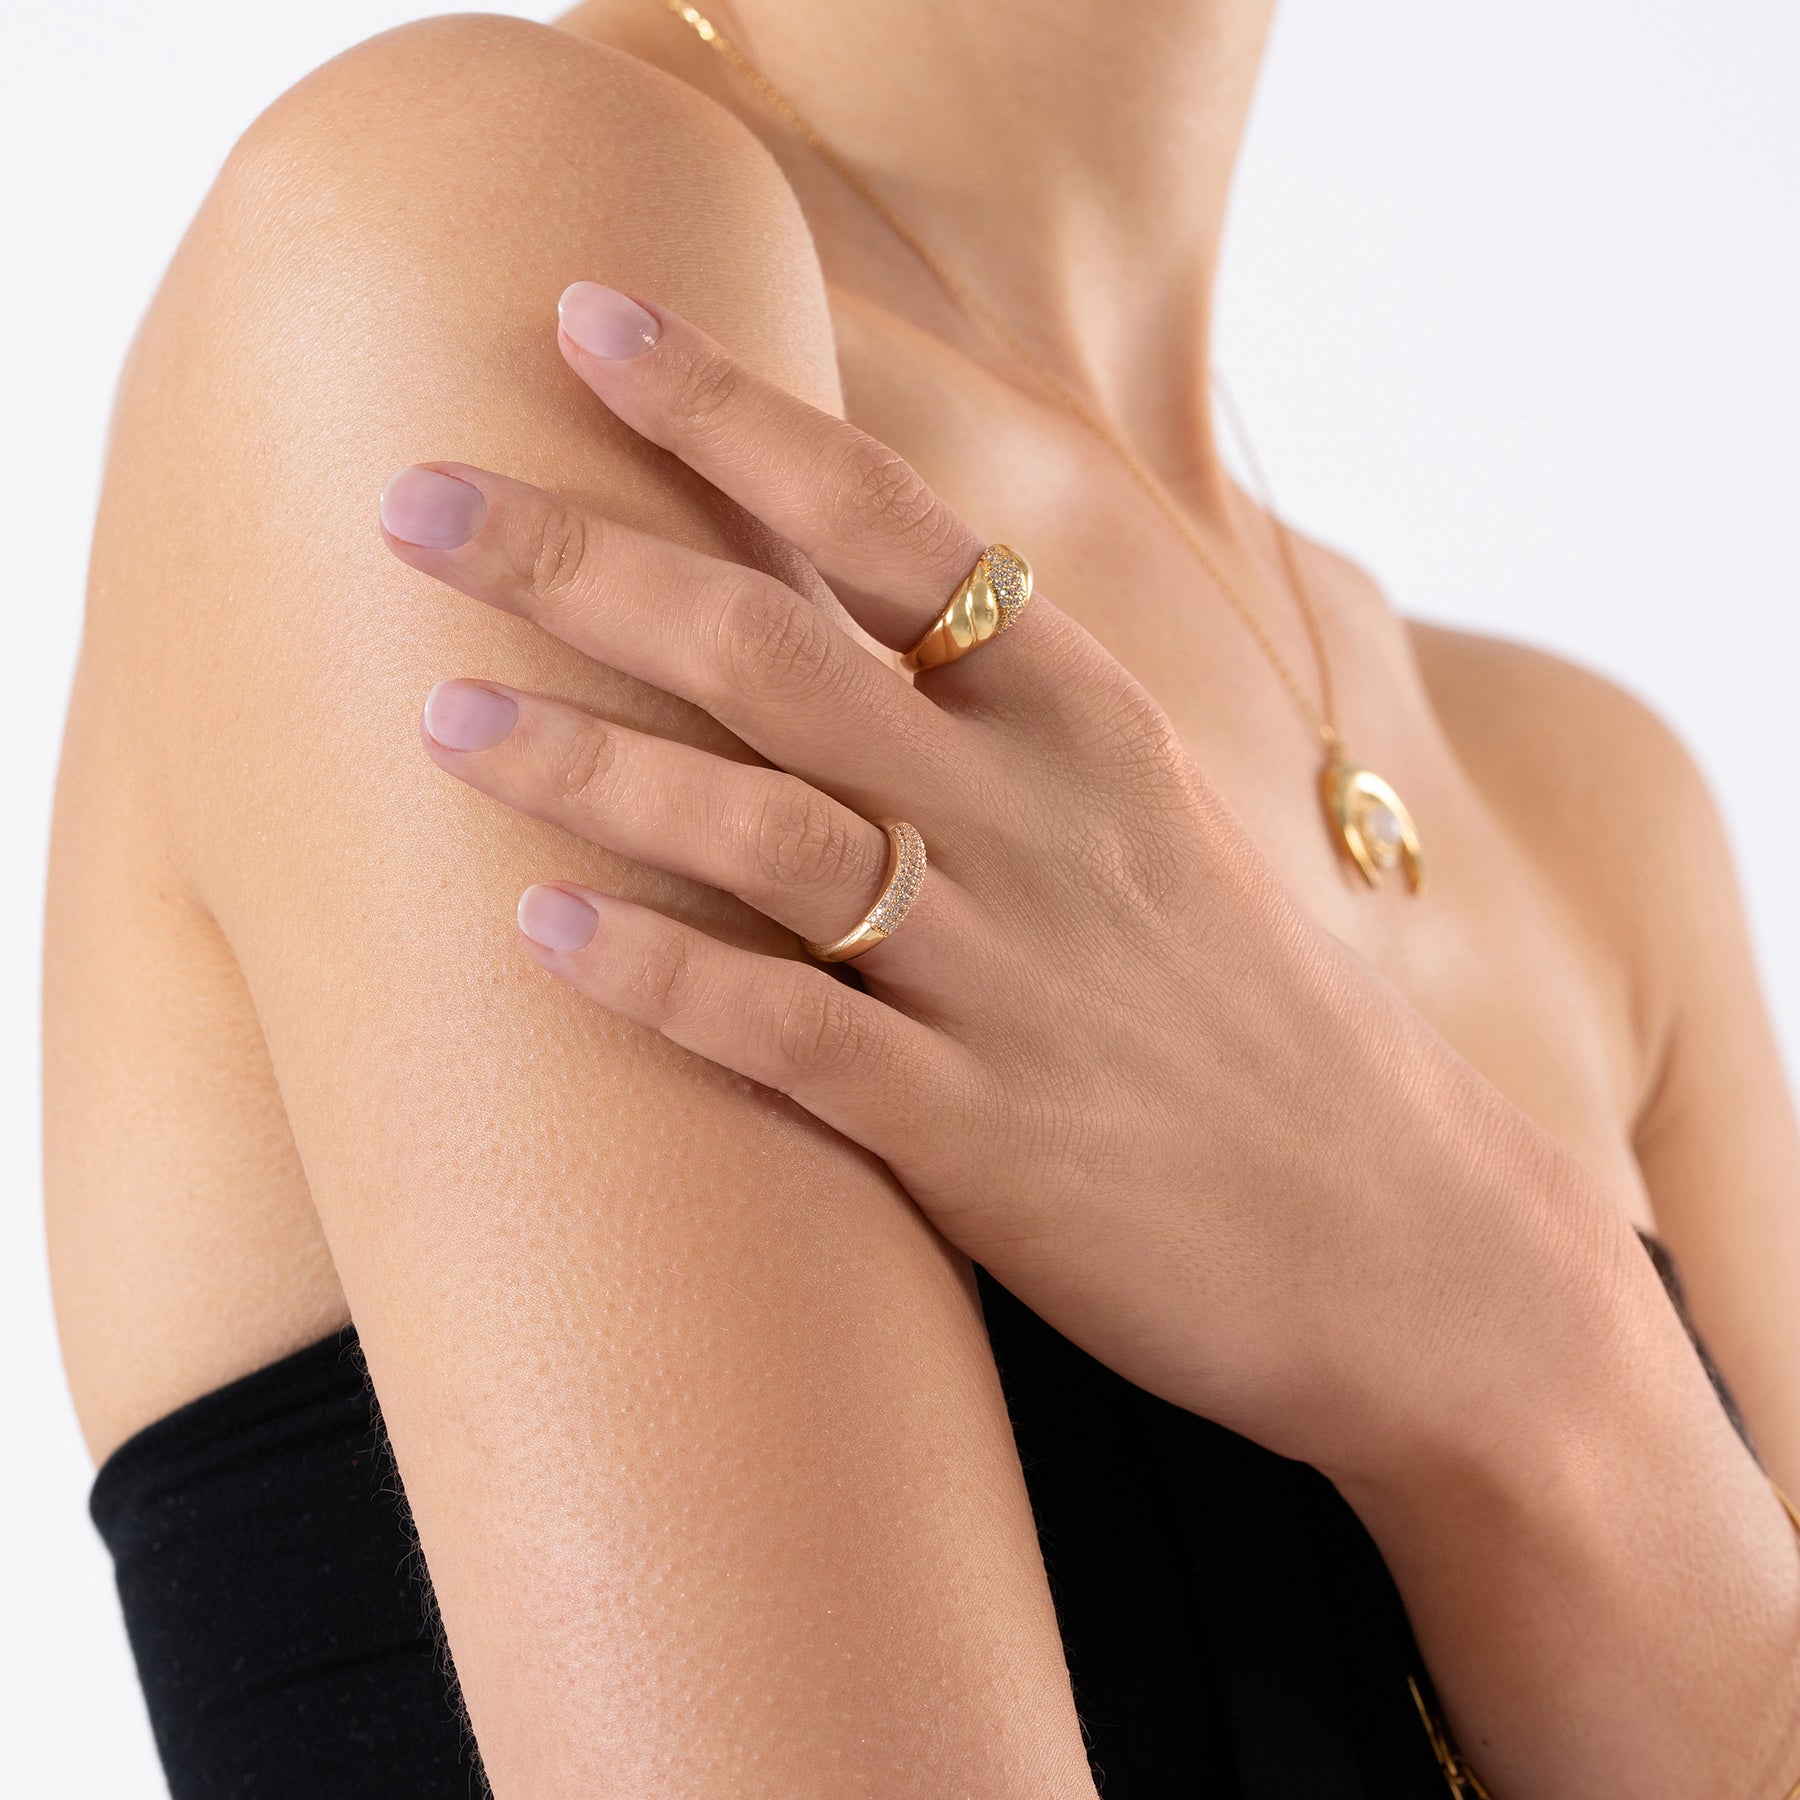 Cupola Sparkly Gold Ring